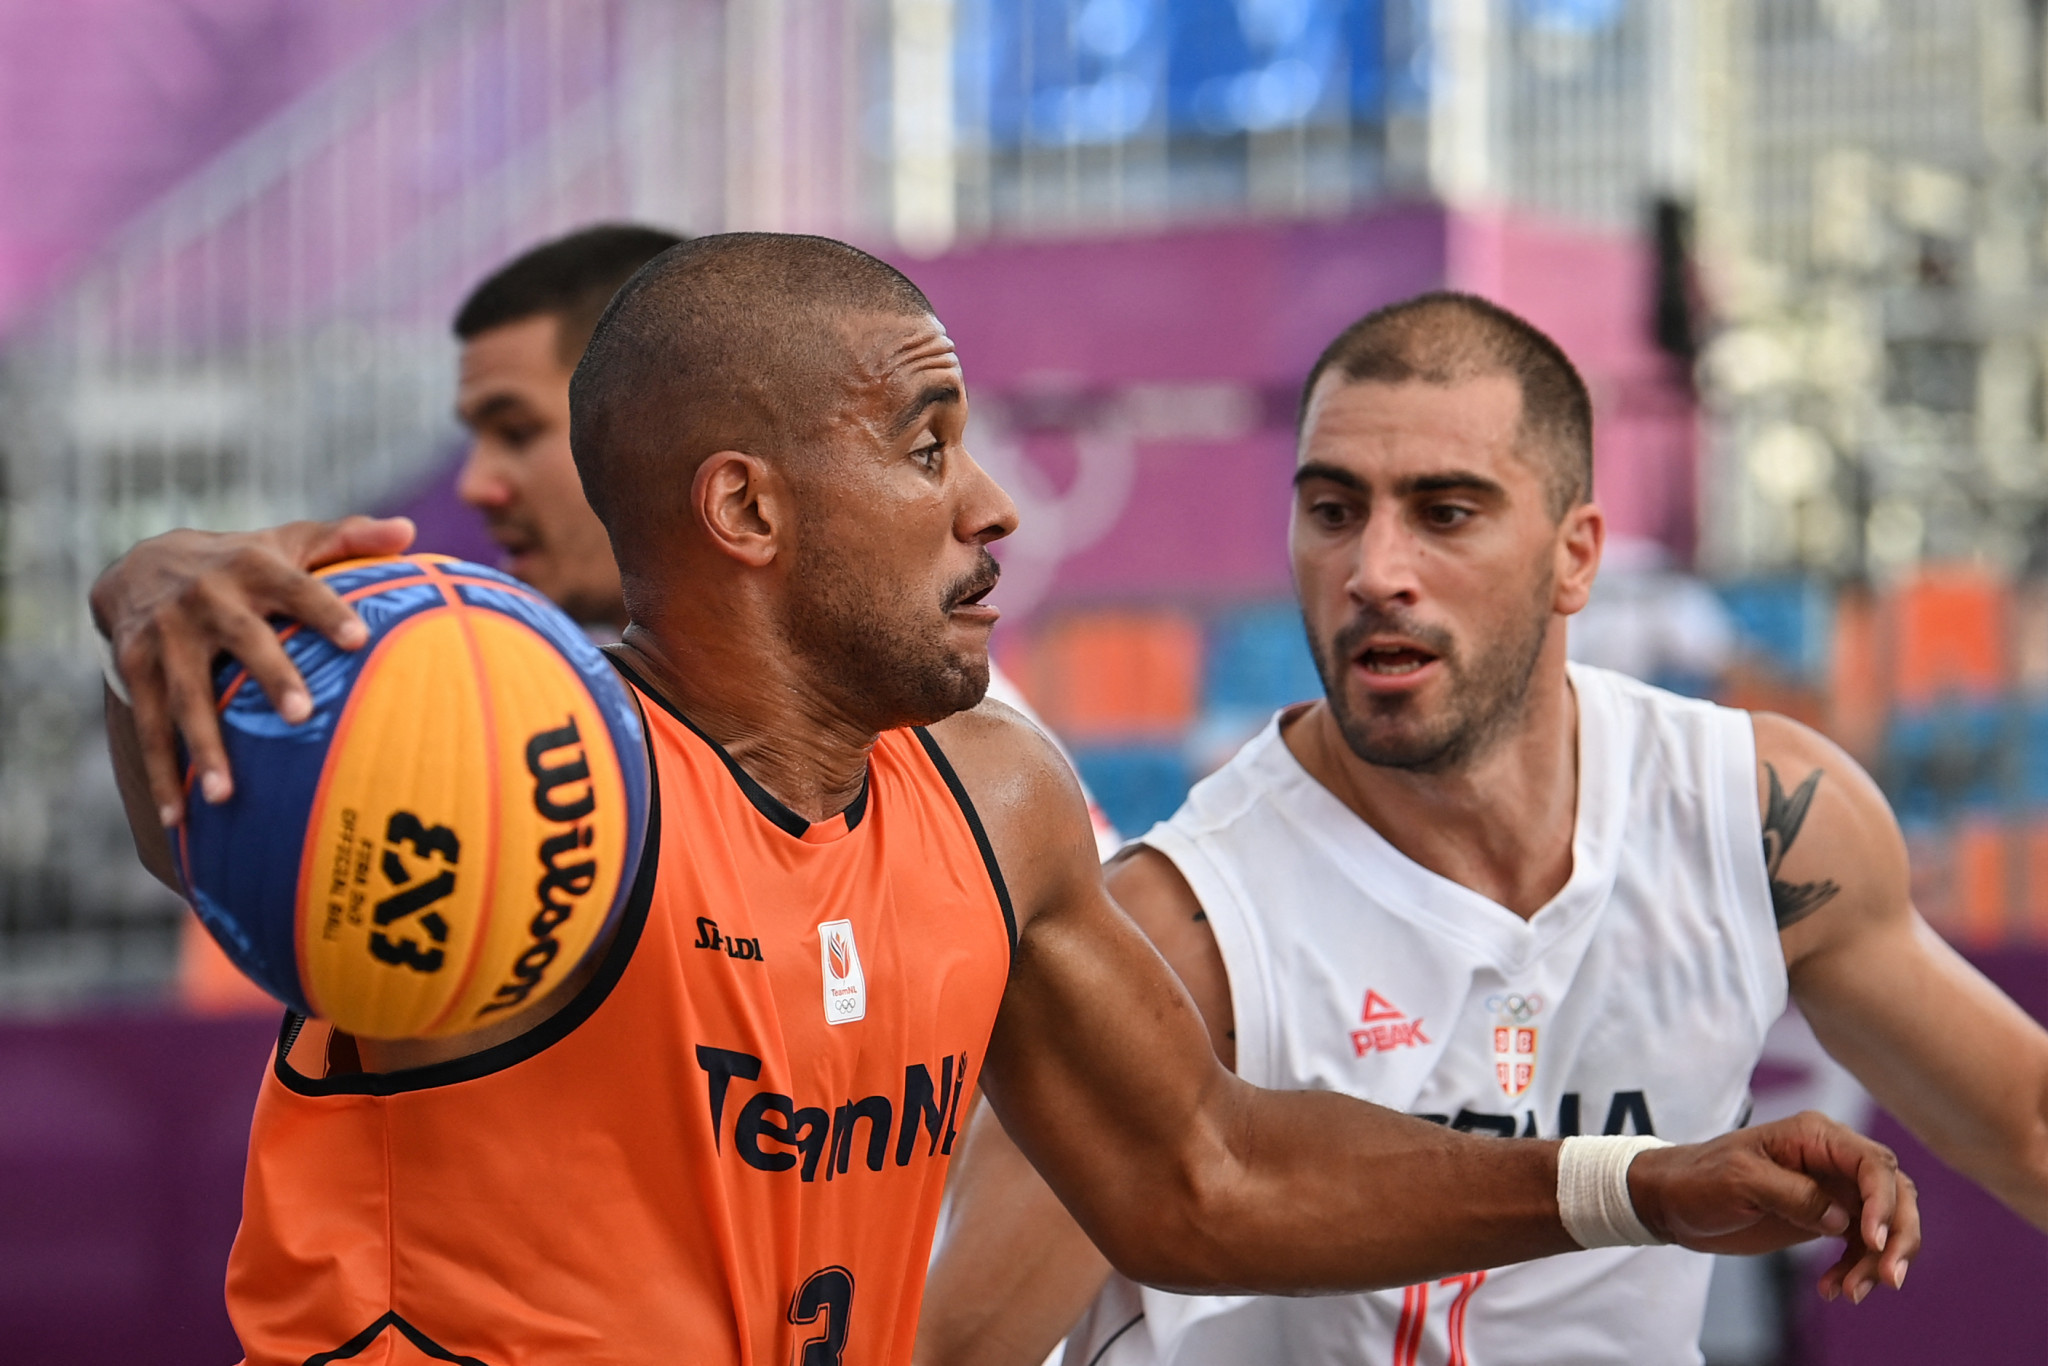 Van der Horst leads the charge for Amsterdam at the FIBA 3x3 World Tour